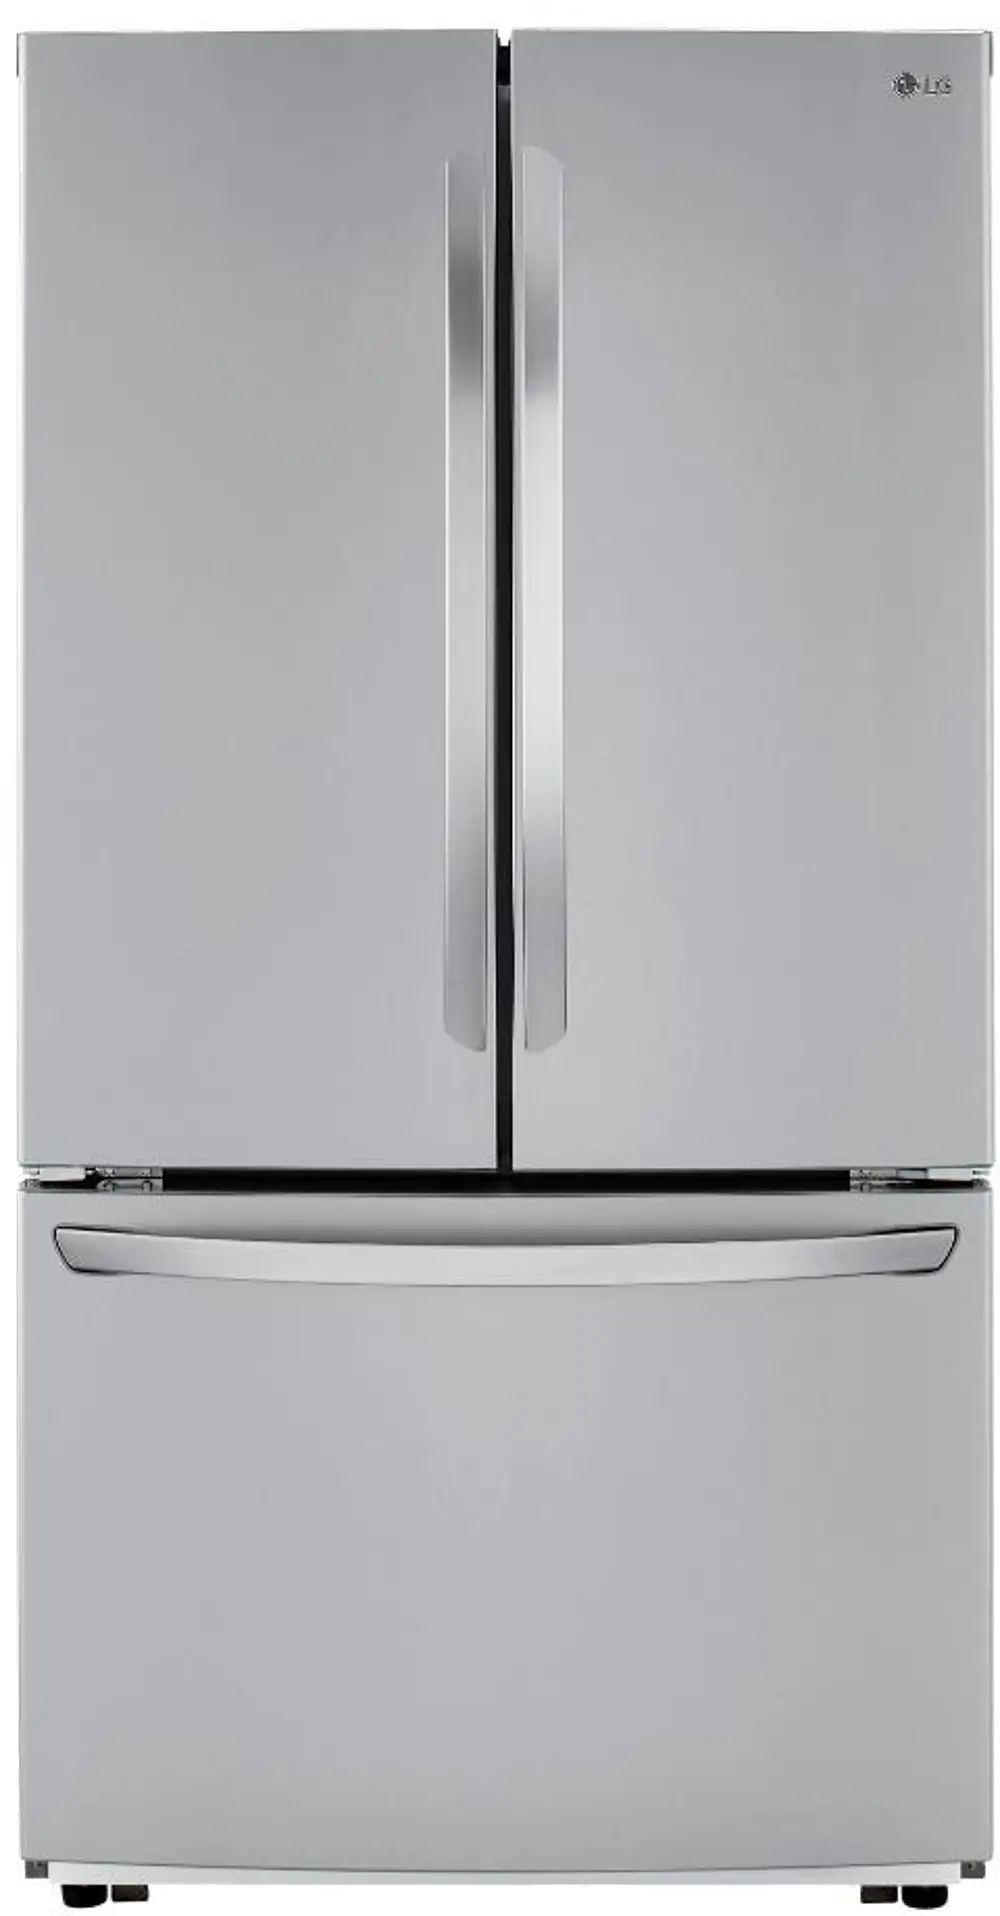 LFCC22426S LG 22.8 cu ft French Door Refrigerator - Counter Depth Stainless Steel-1